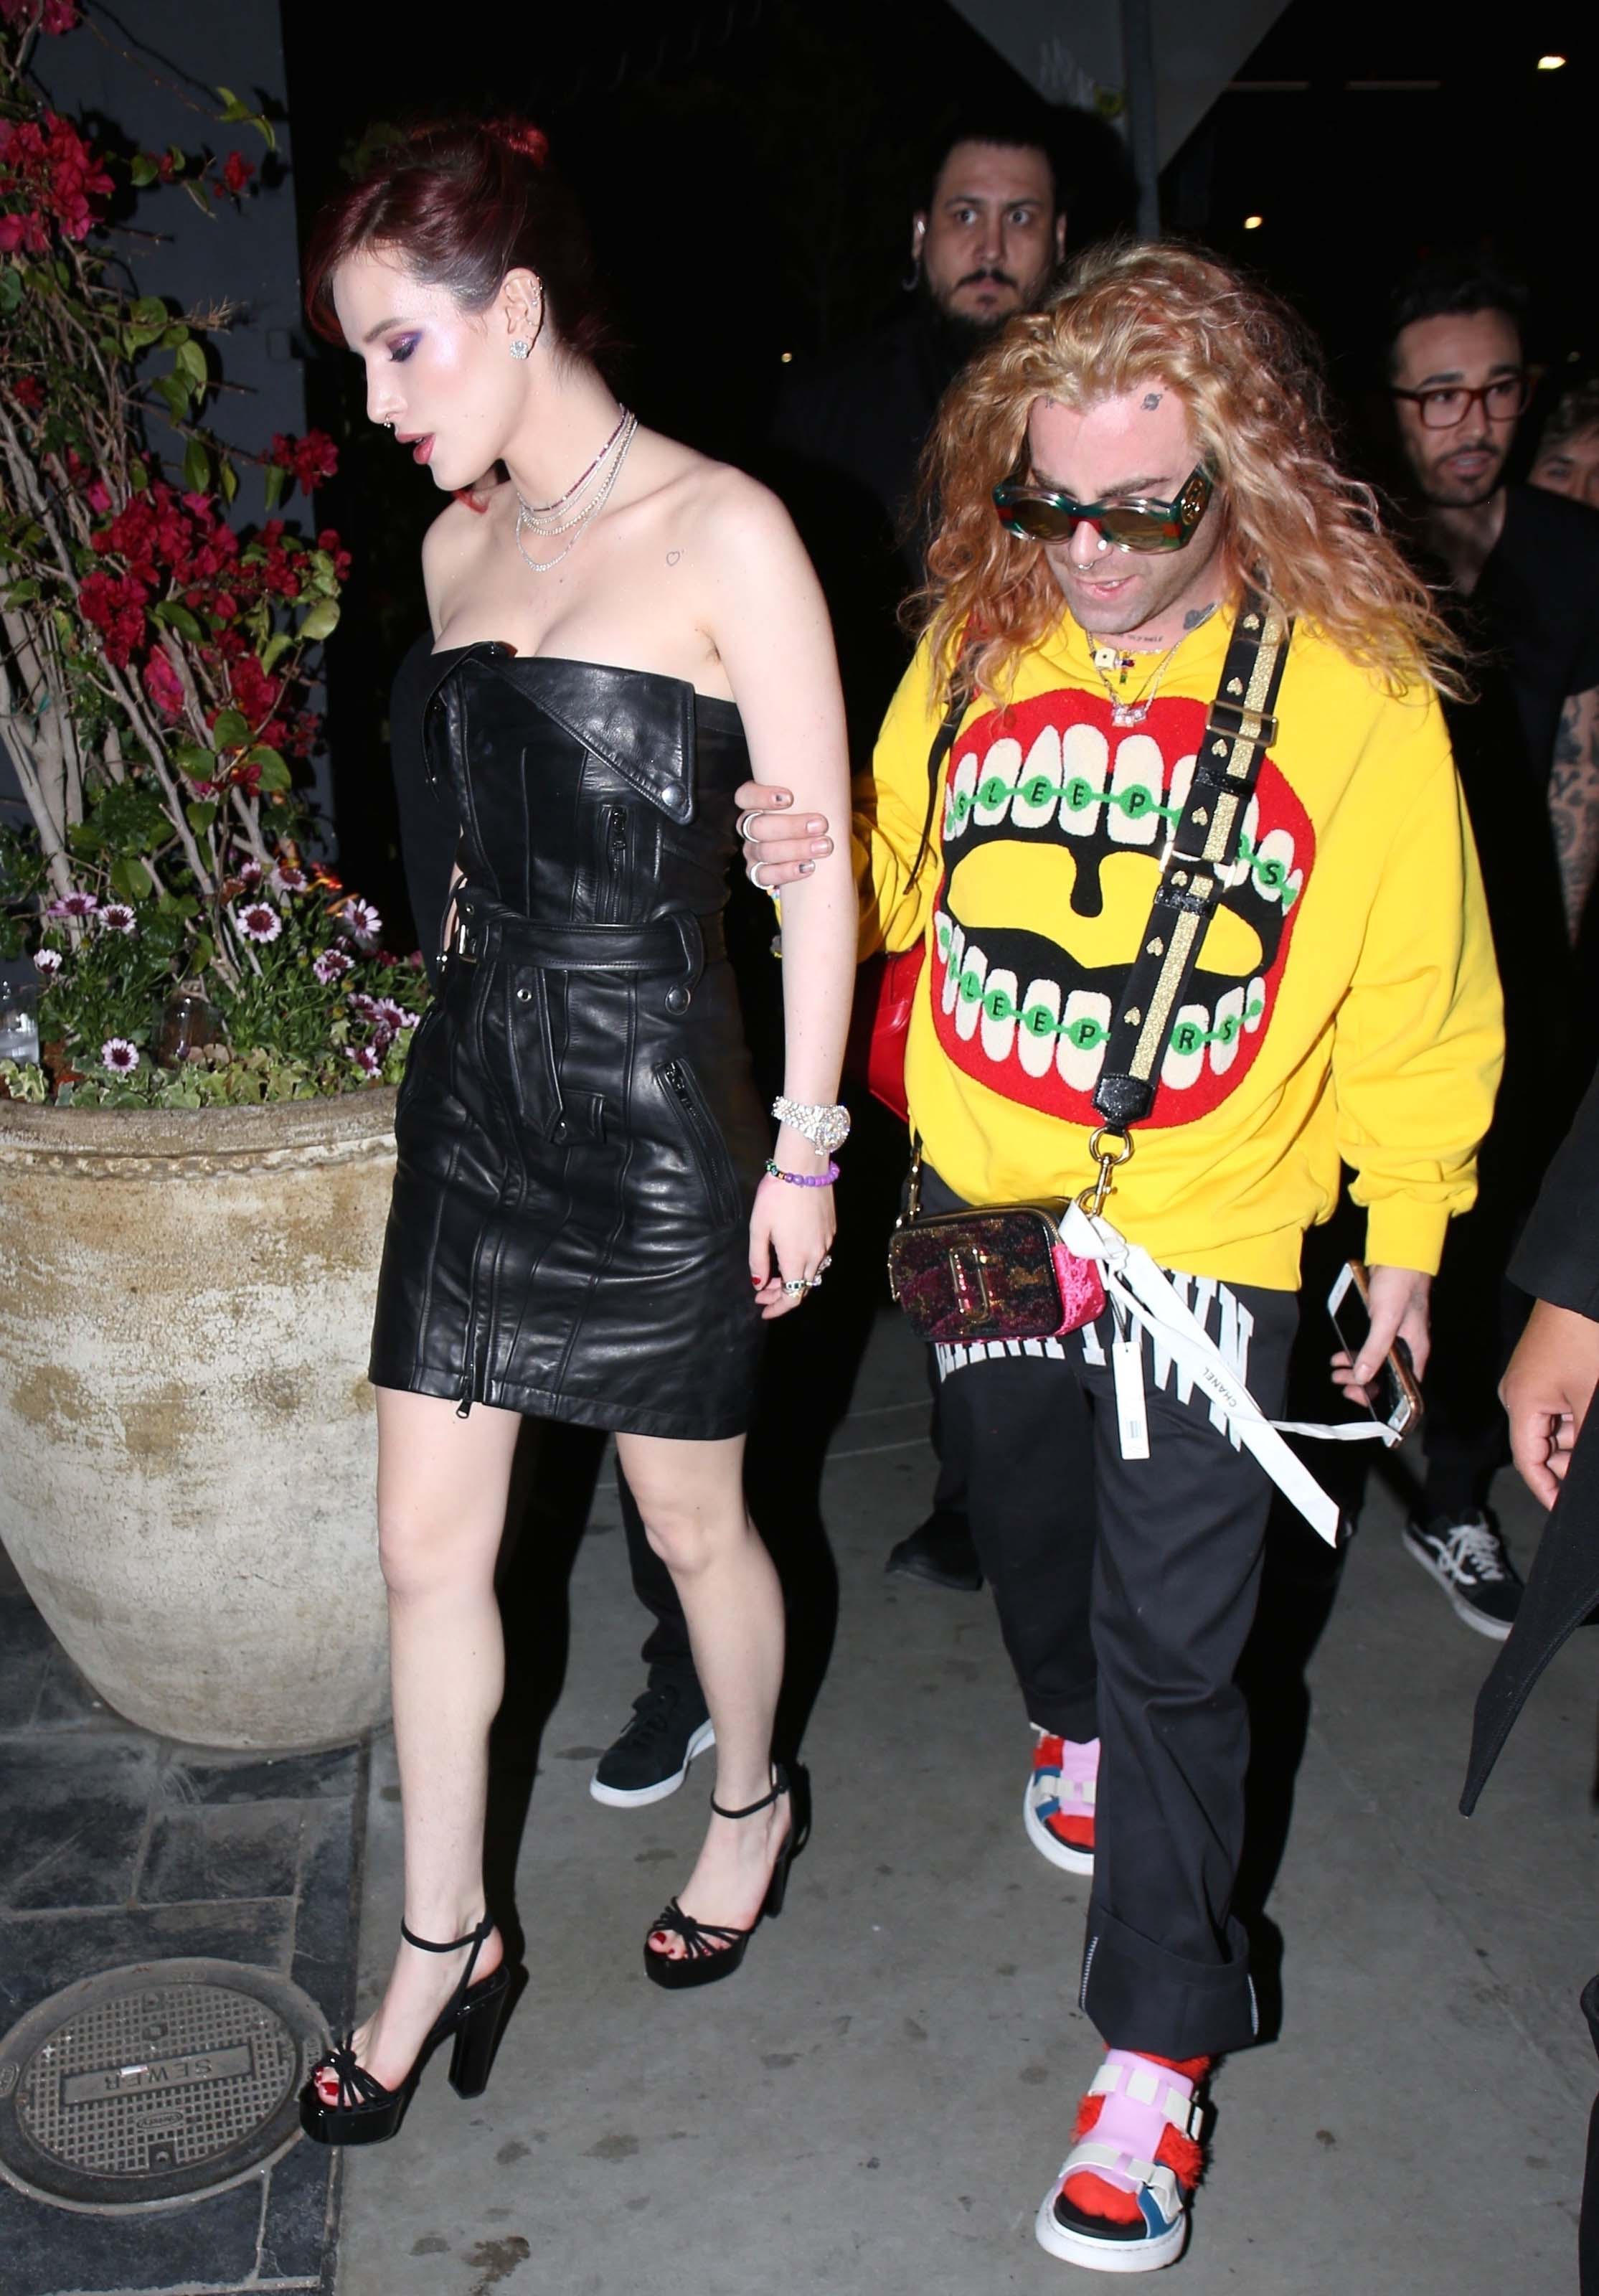 Bella Thorne was spotted arriving at Avenue nightclub